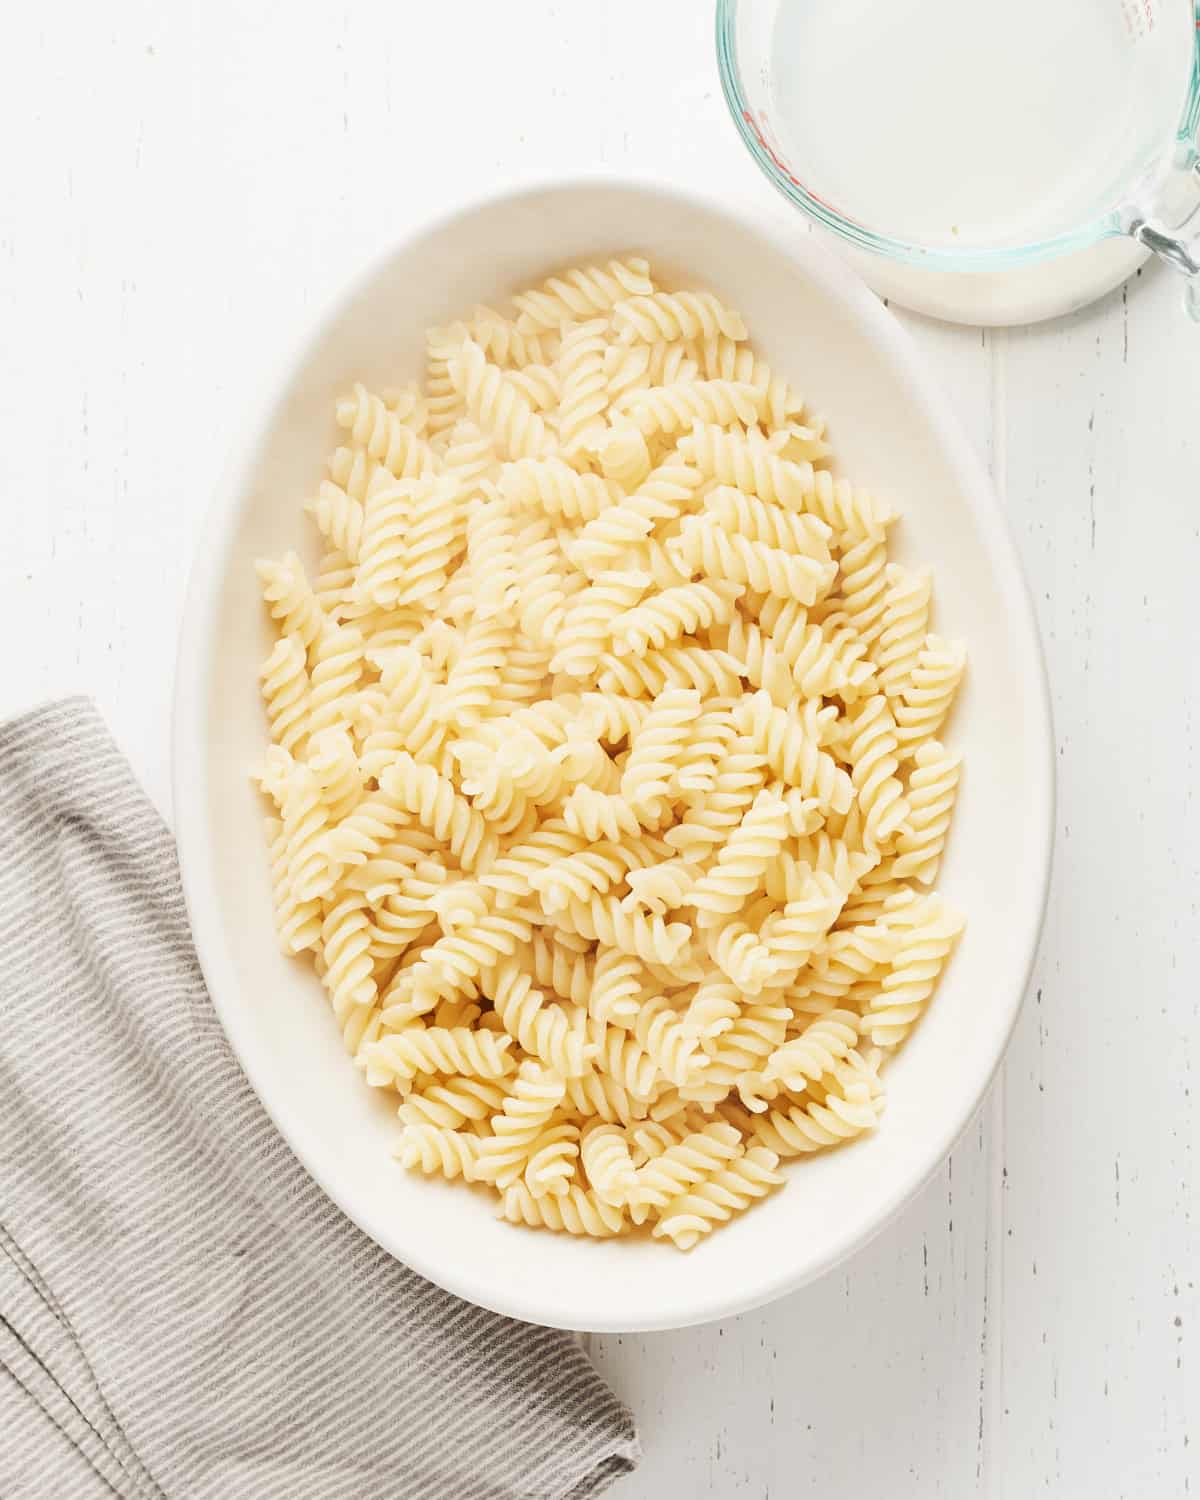 Overhead view of cooked fusilli in a white bowl with pasta water nearby on a white wood surface.